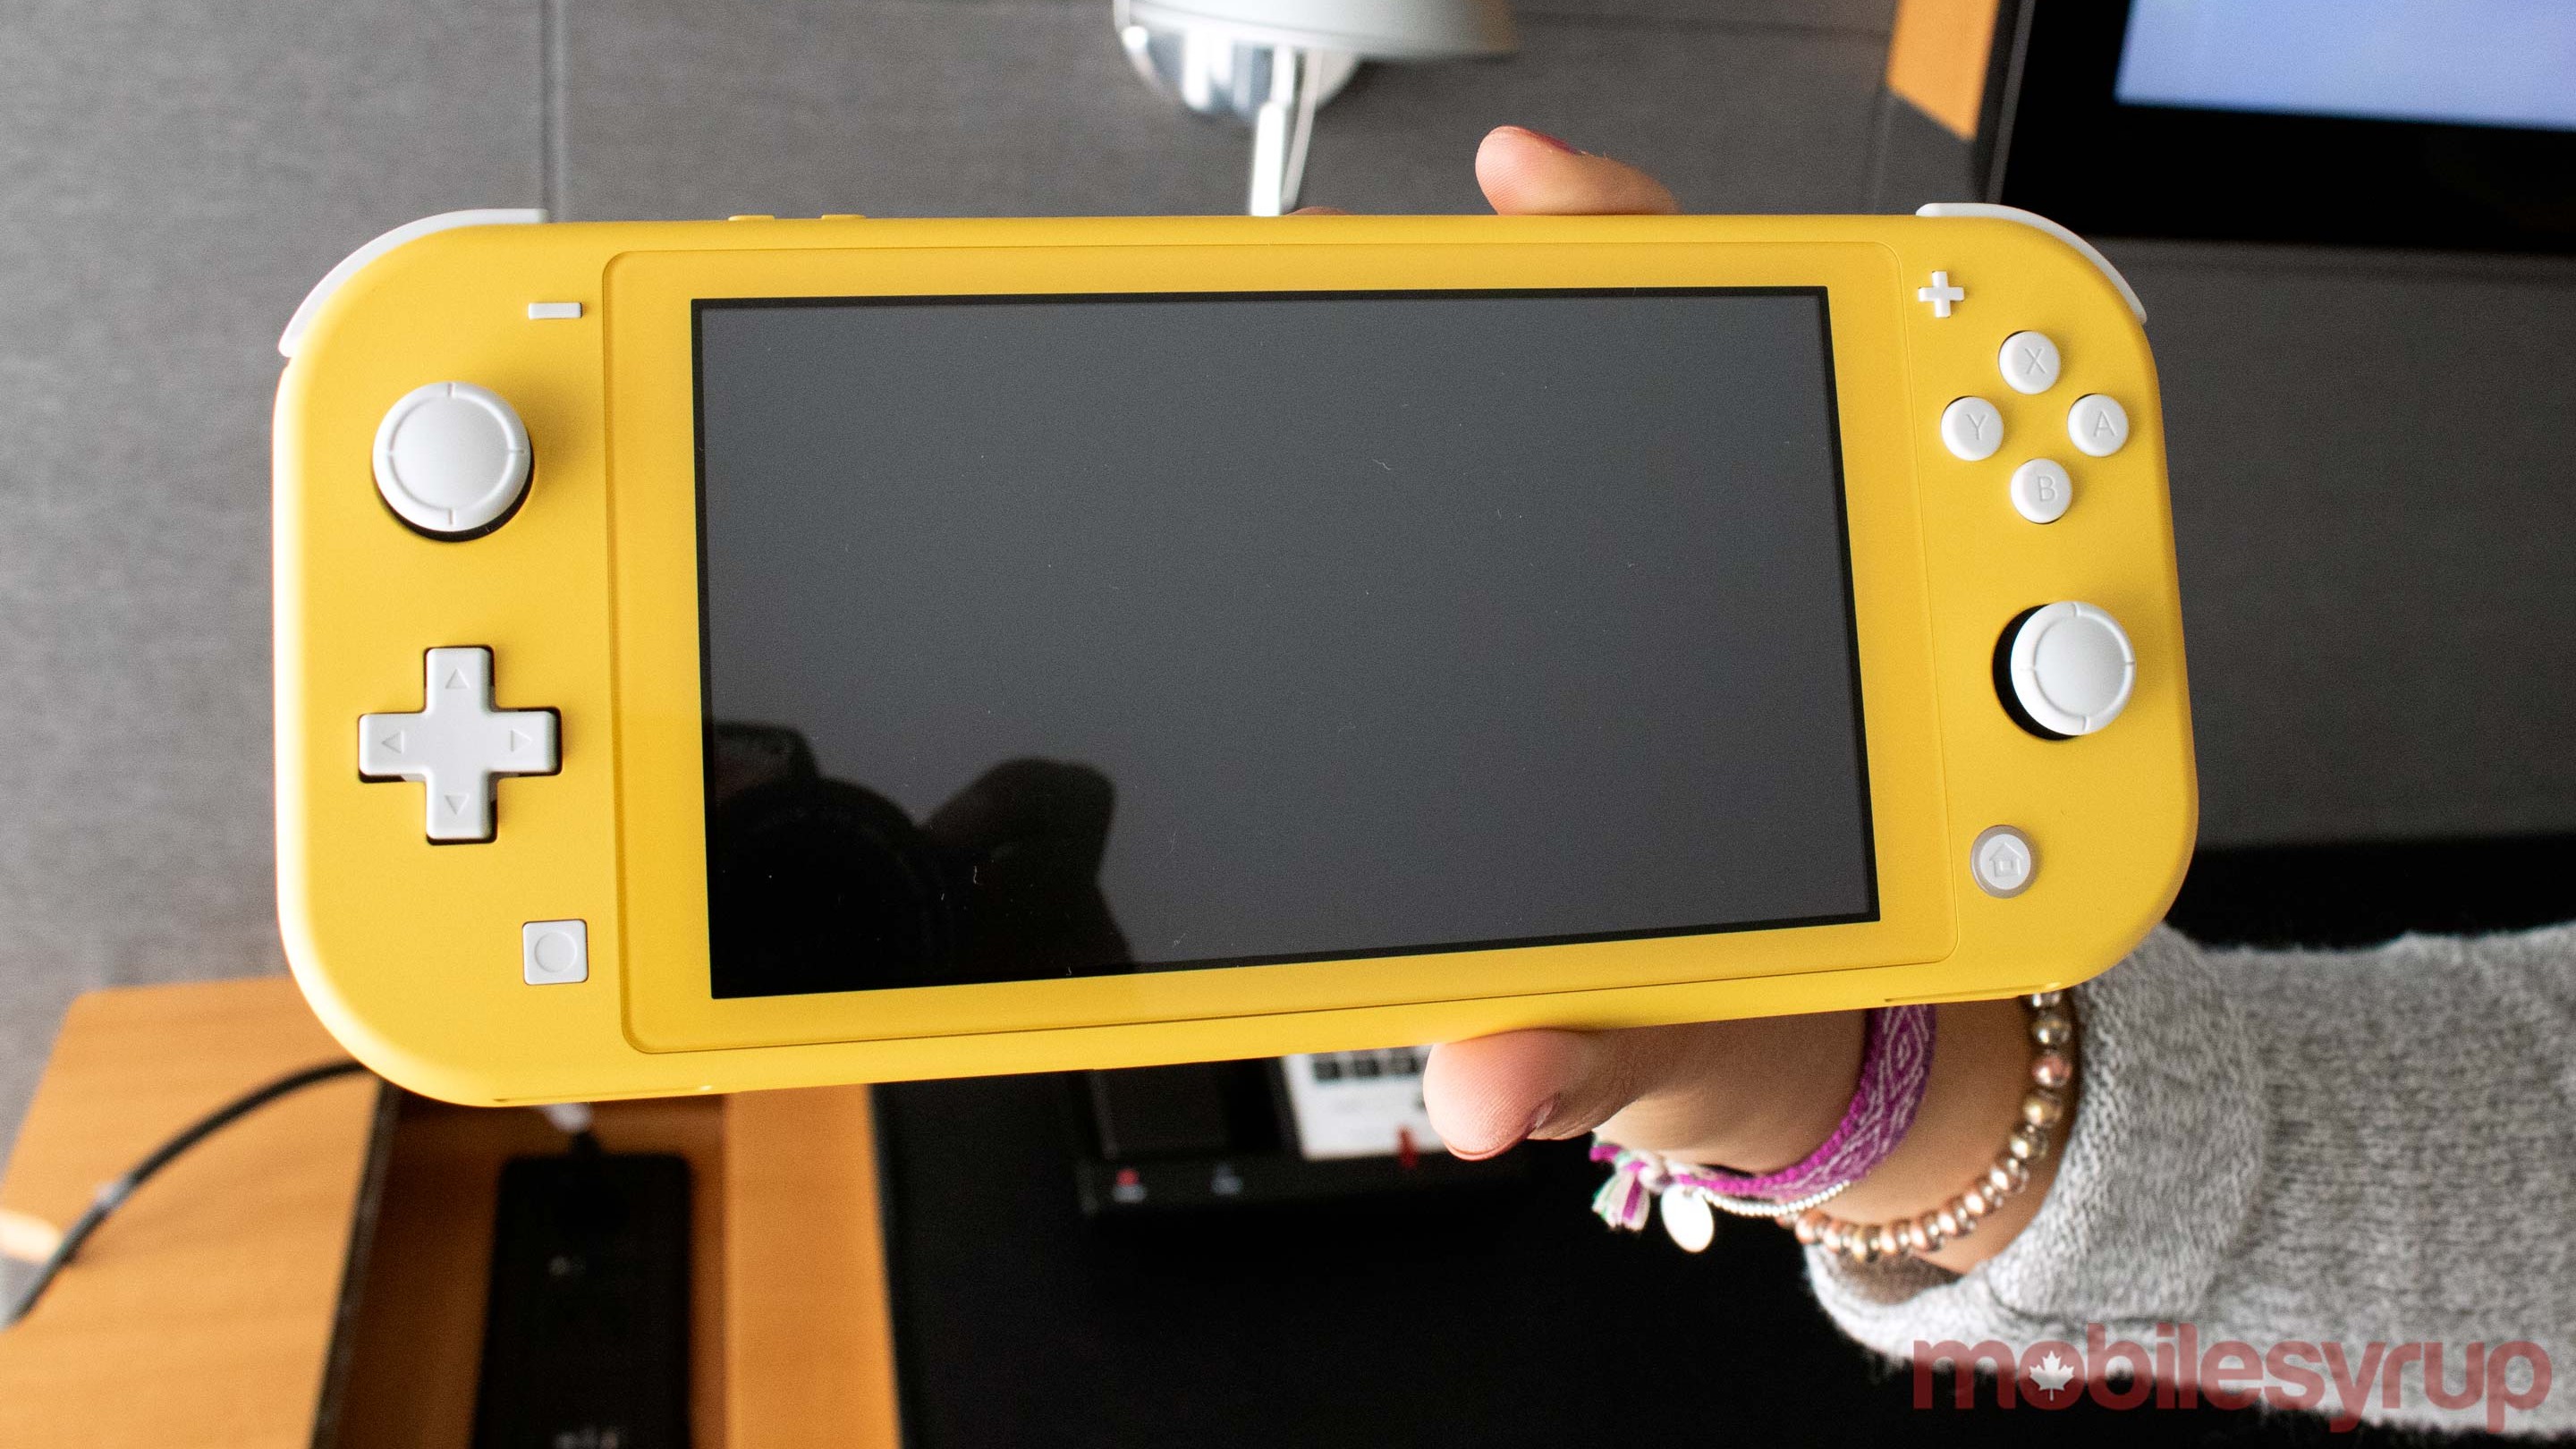 Nintendo Reportedly Wanted the Switch Lite Price to Be Less Than $200